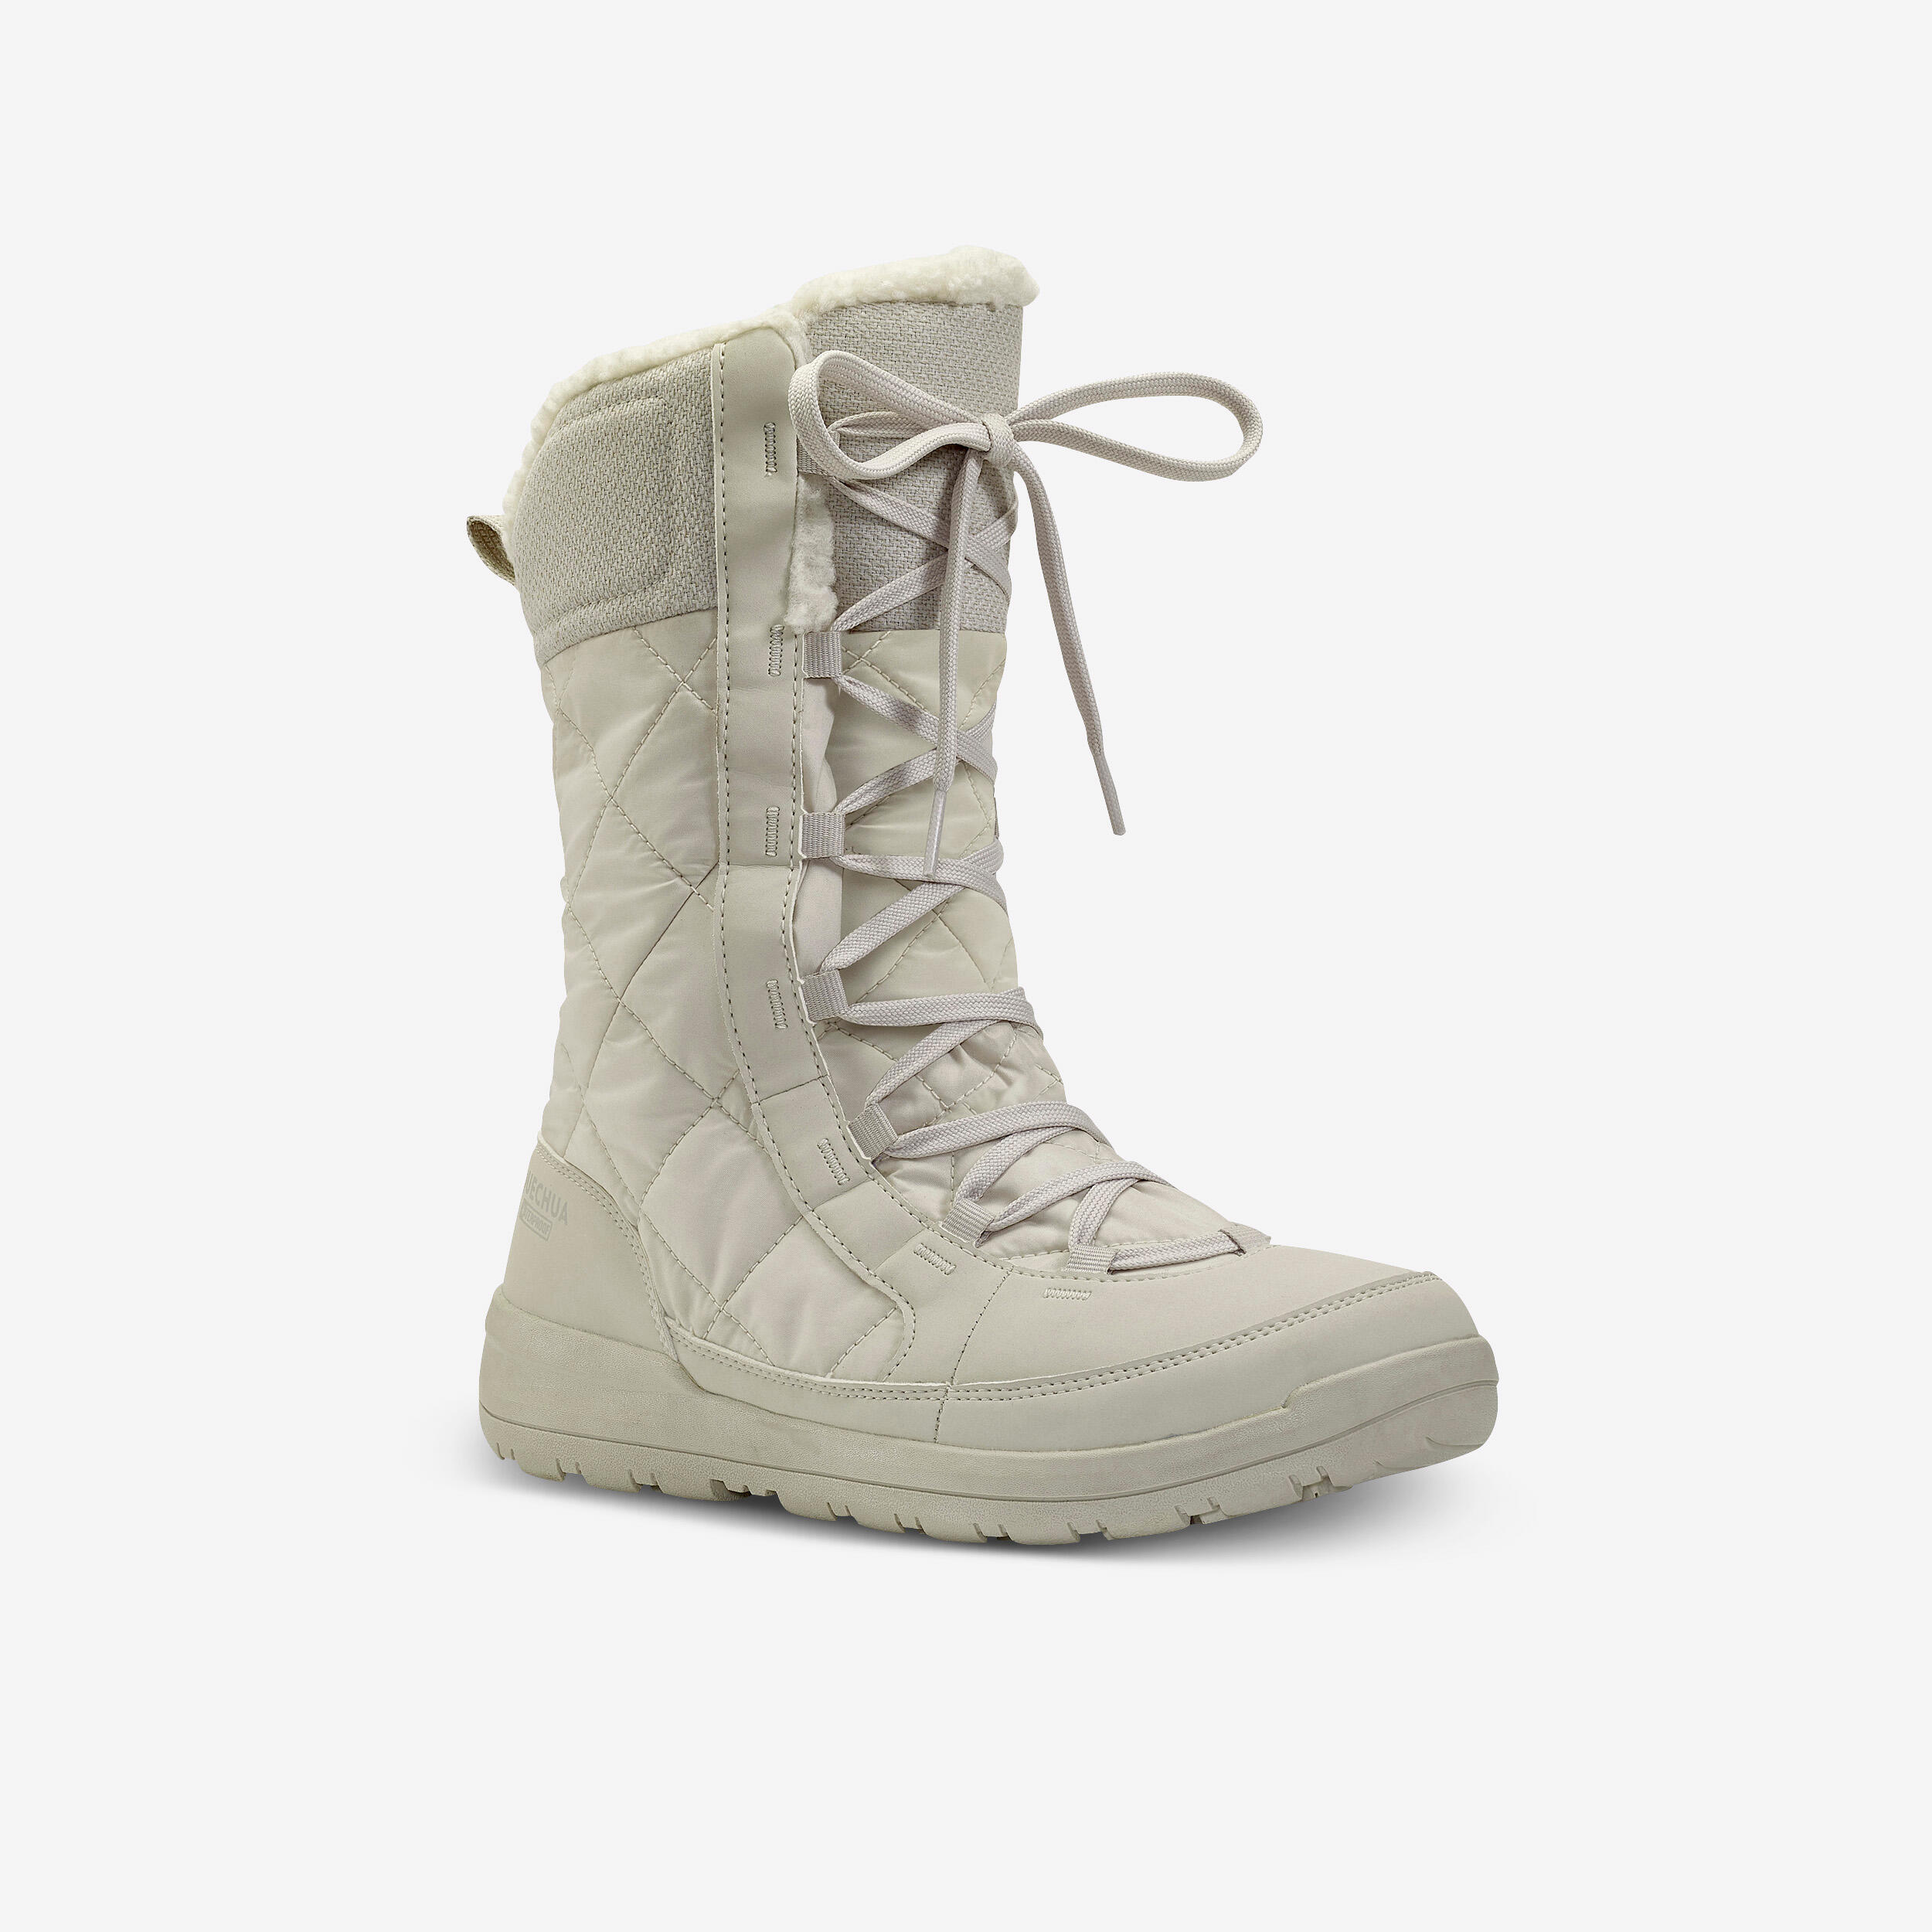 Women's warm waterproof snow boots - SH500 high - lace-up  1/7